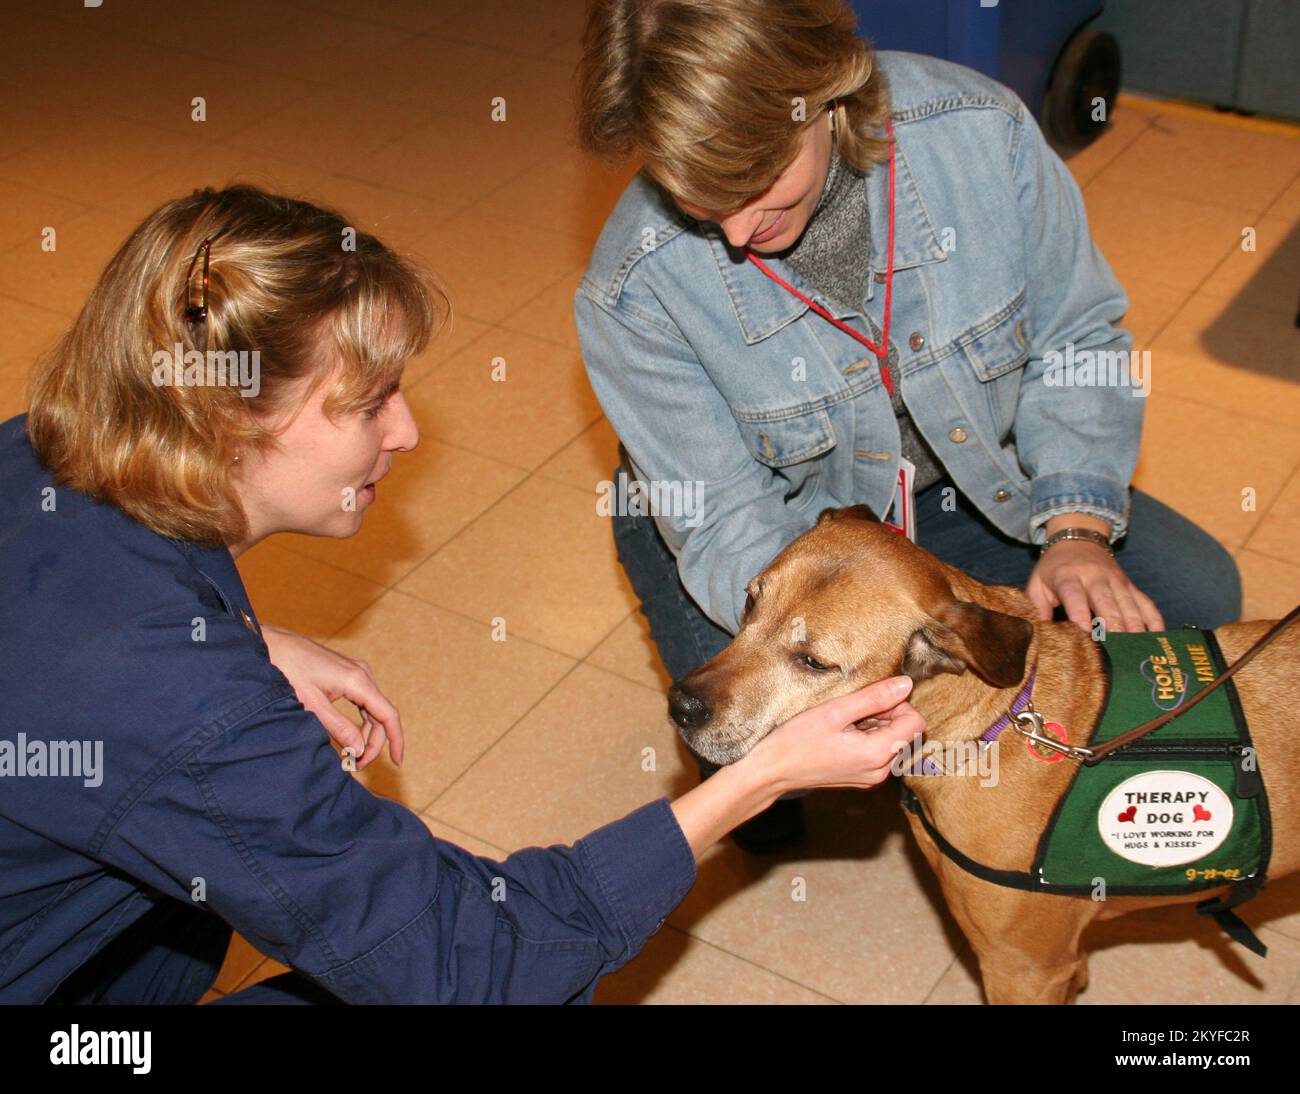 Hurricane Katrina, Baton Rouge, LA, December 19, 2005 - 'Janie' is one of 12 Hope Crisis Response therapy dogs visiting displaced hurricane victims and relief workers throughout the New Orleans area. She is based at the Joint Field Office in Baton Rouge. Robert Kaufmann/FEMA Stock Photo